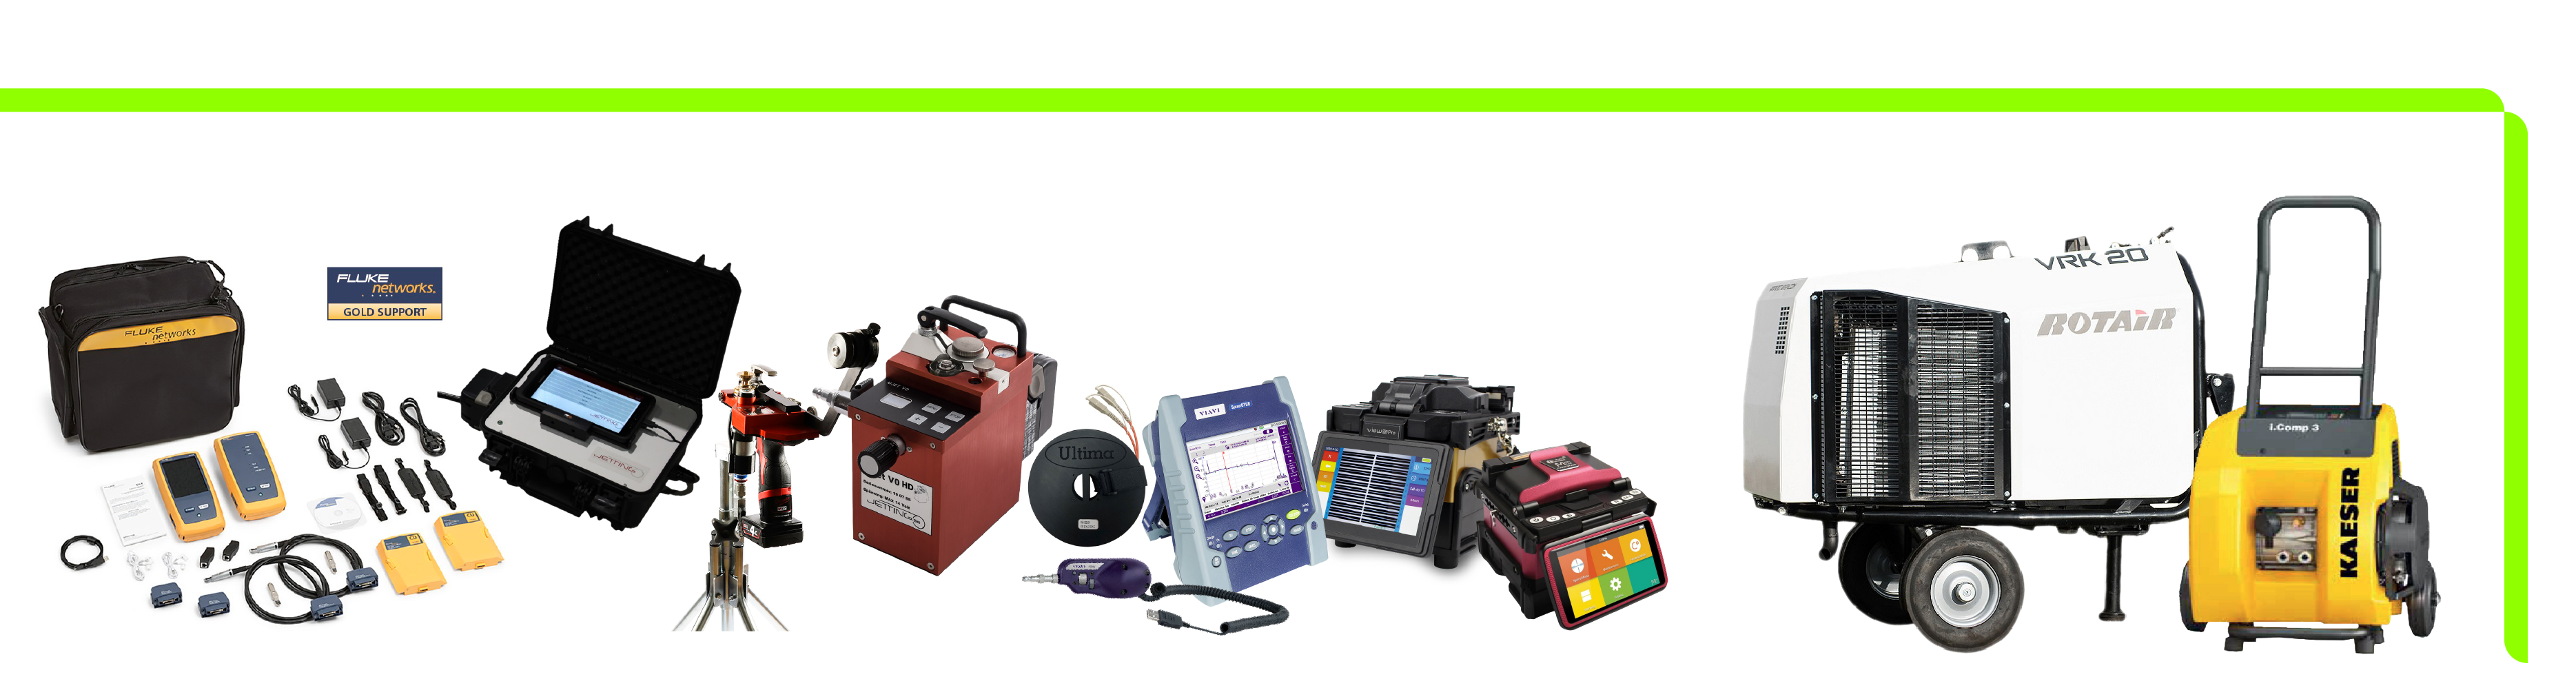 Cablinf Equipment for Hire